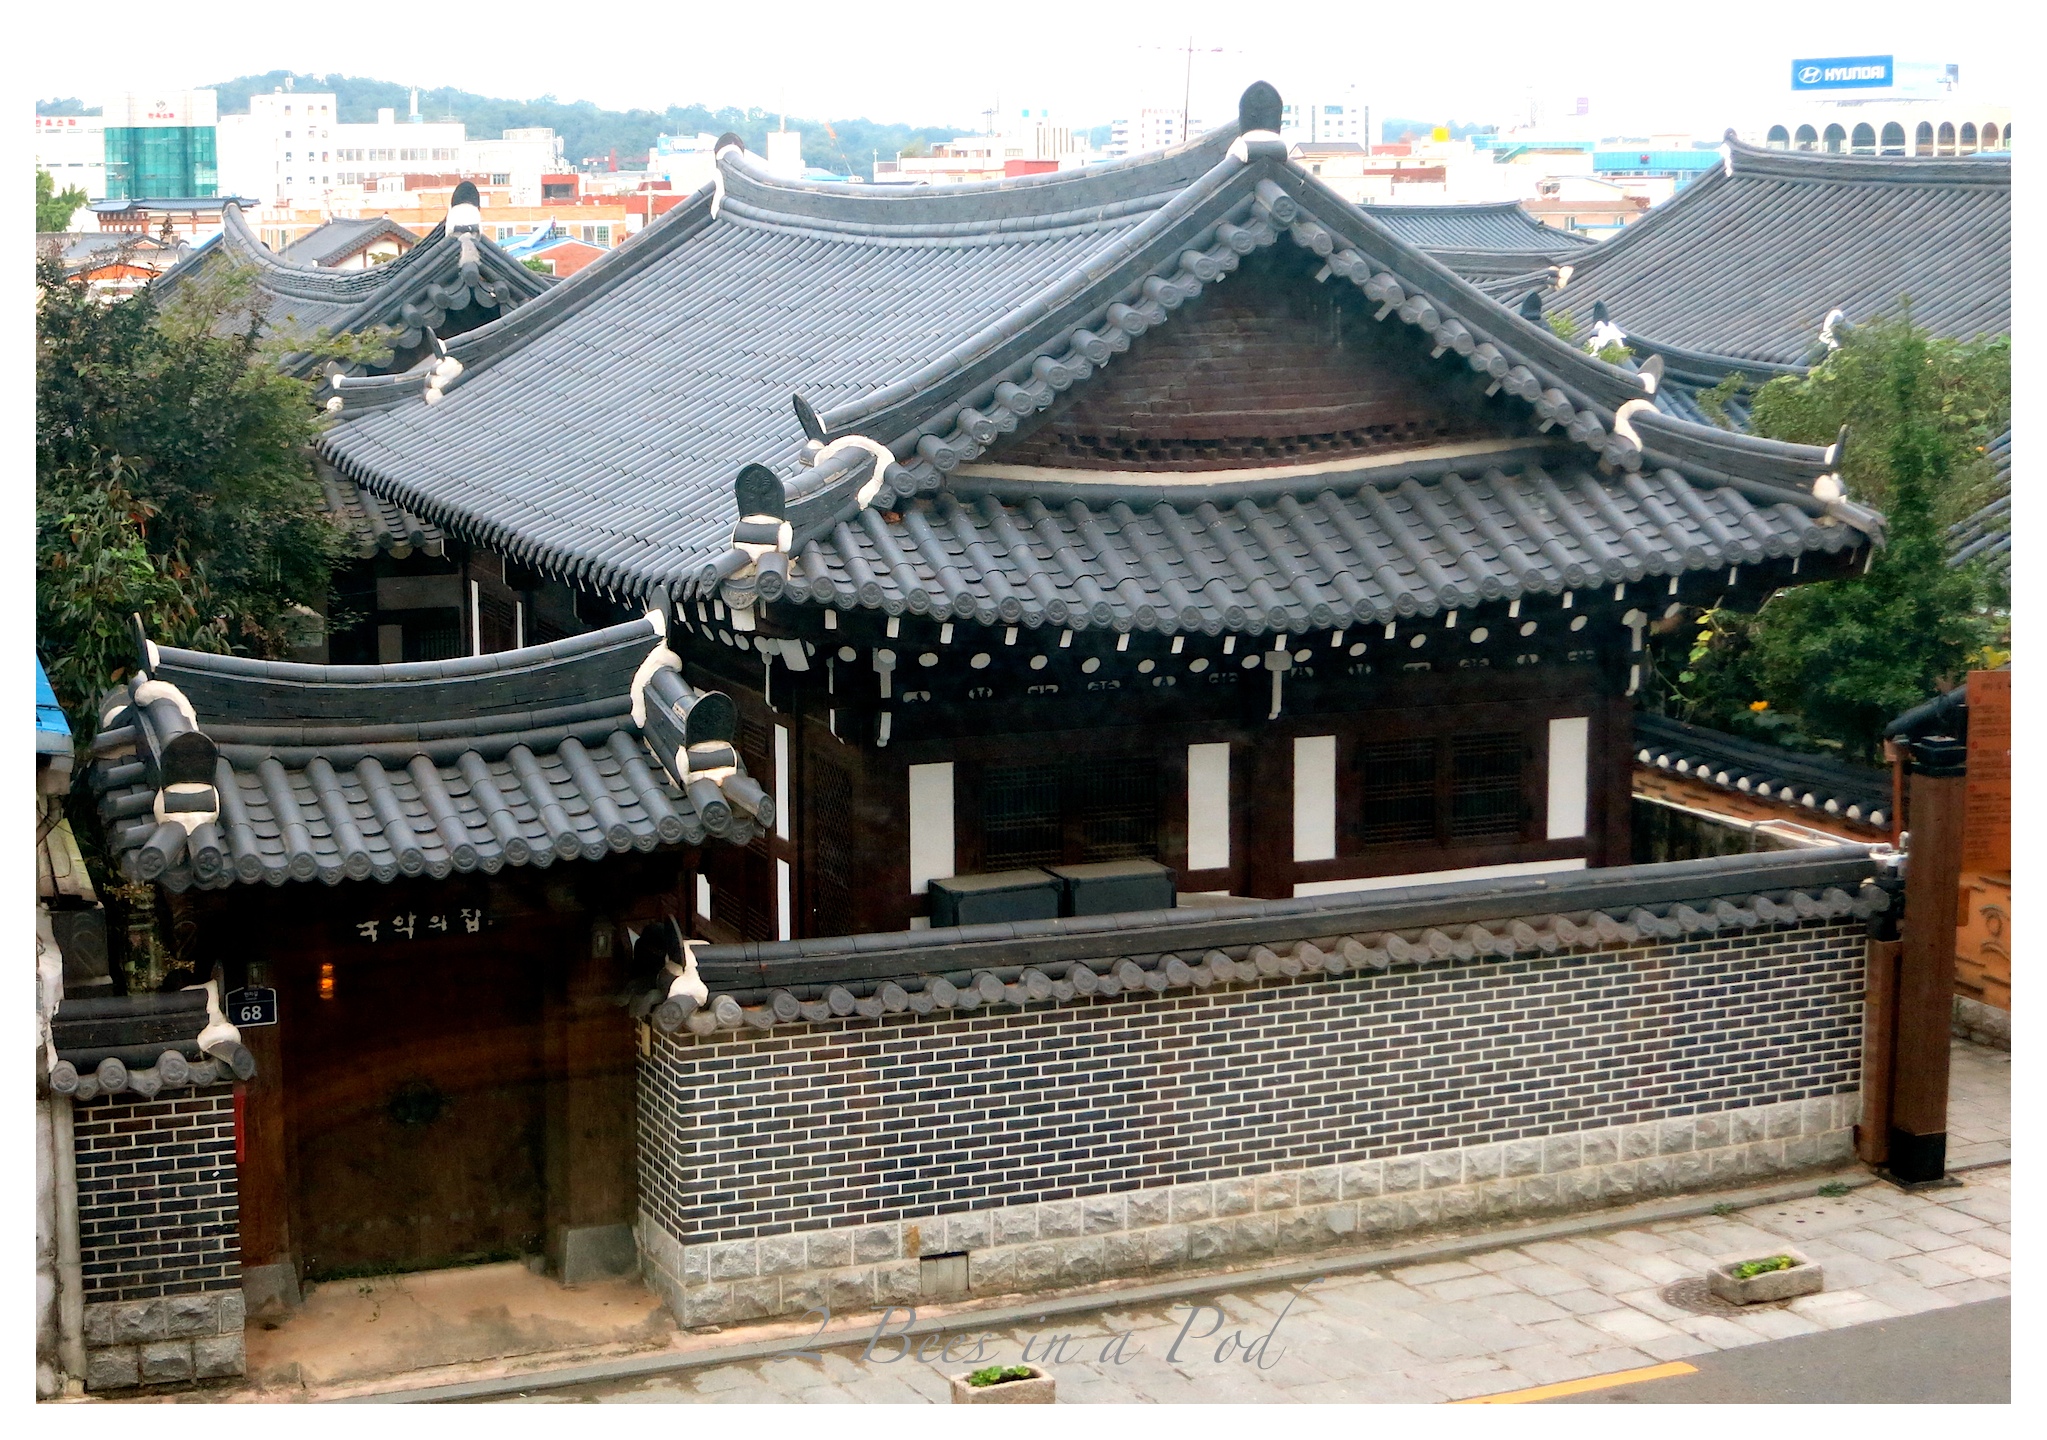 Traditional Korean home and architecture